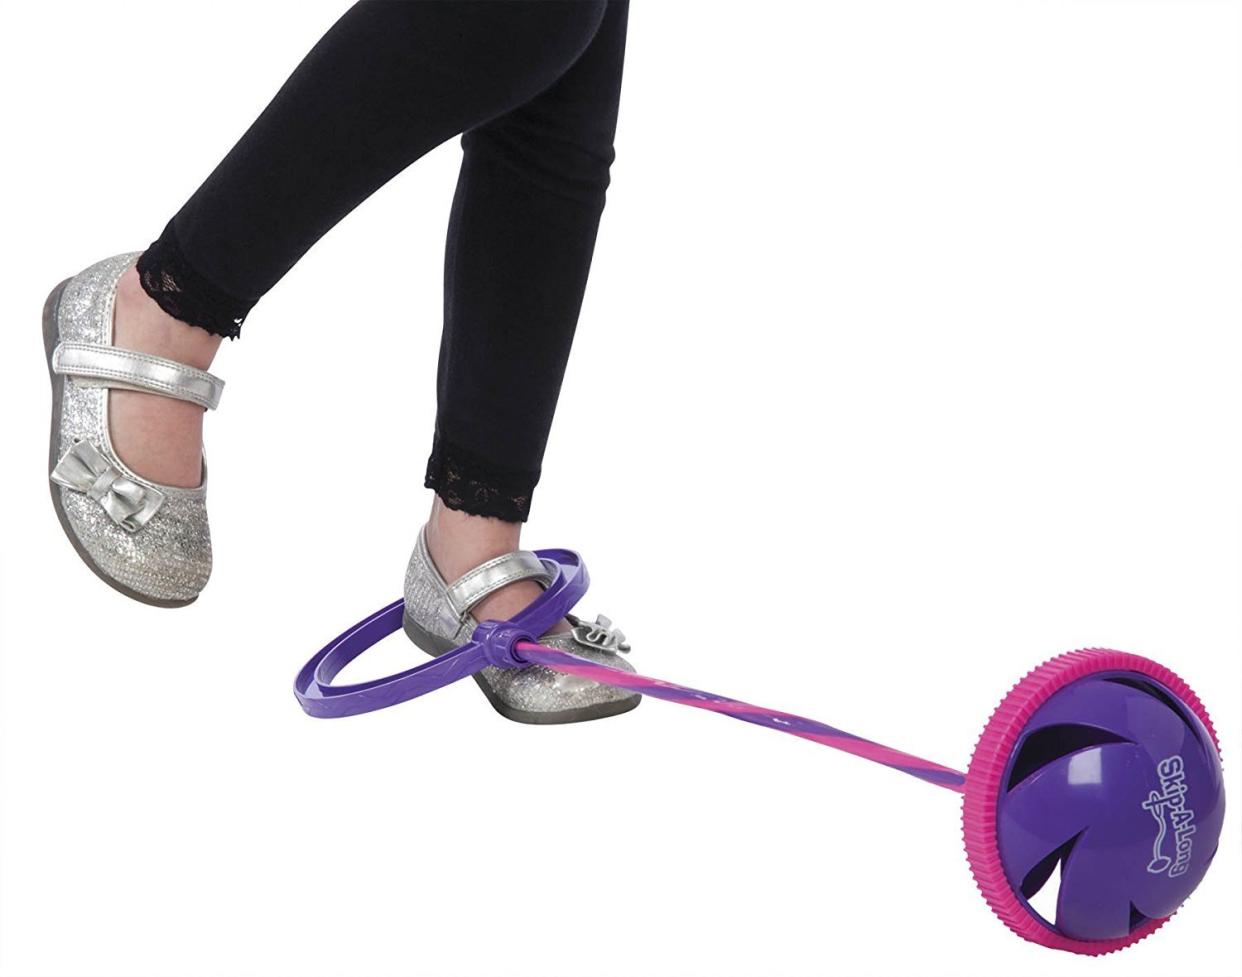 Child with a Skip It toy around her ankle